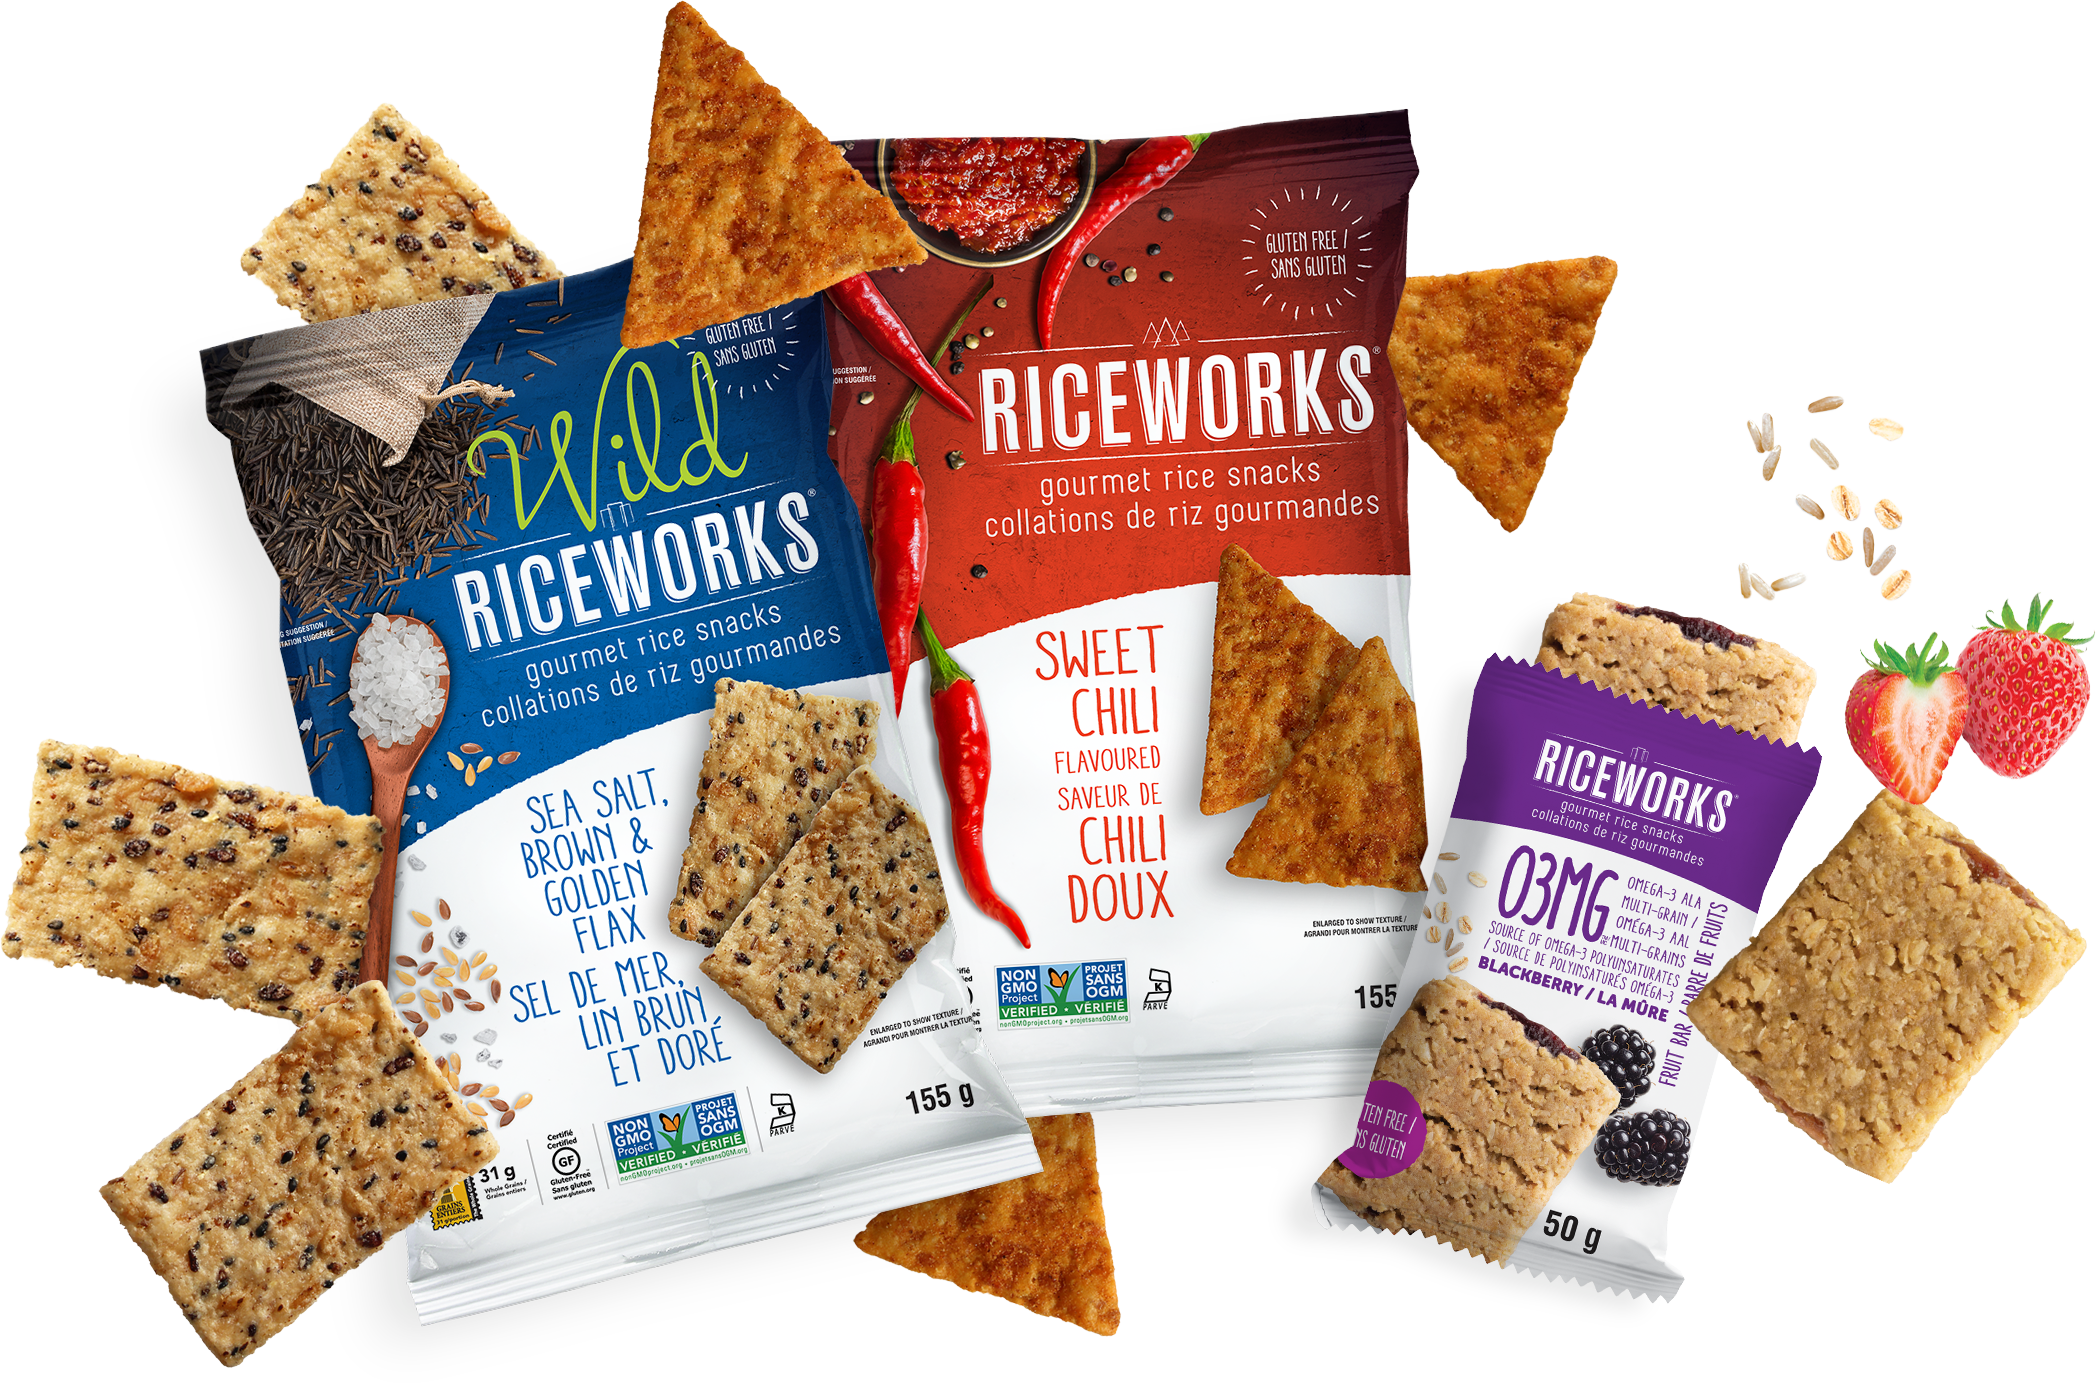 Riceworks products